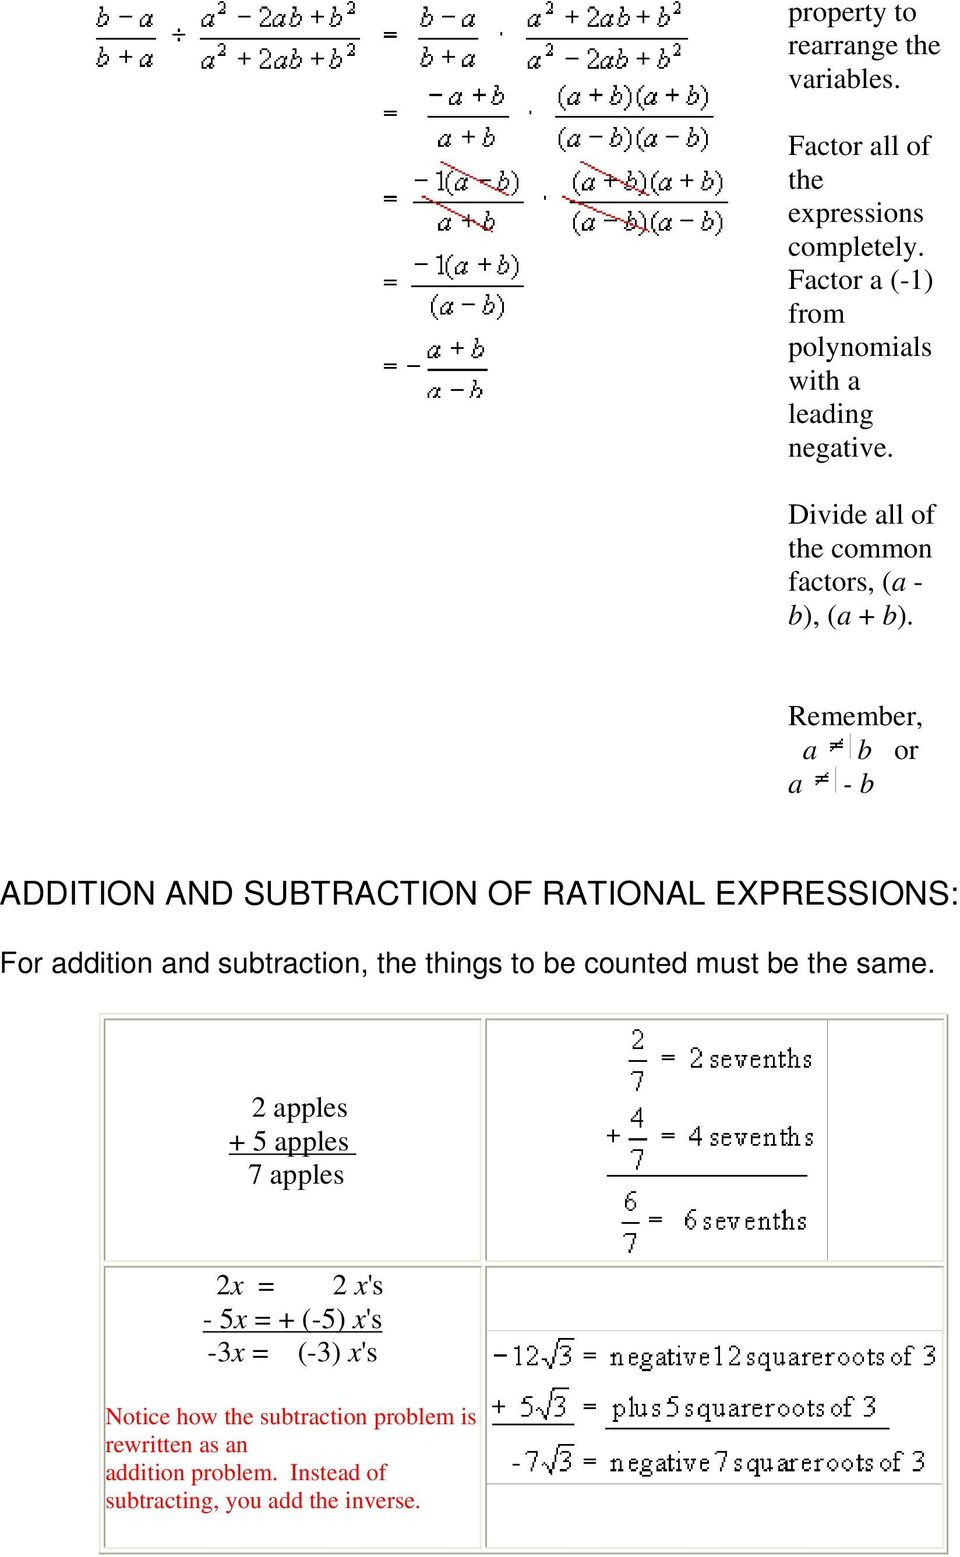 Dividing Rational Expressions Worksheet 3 1 Rational Expressions Pdf Free Download